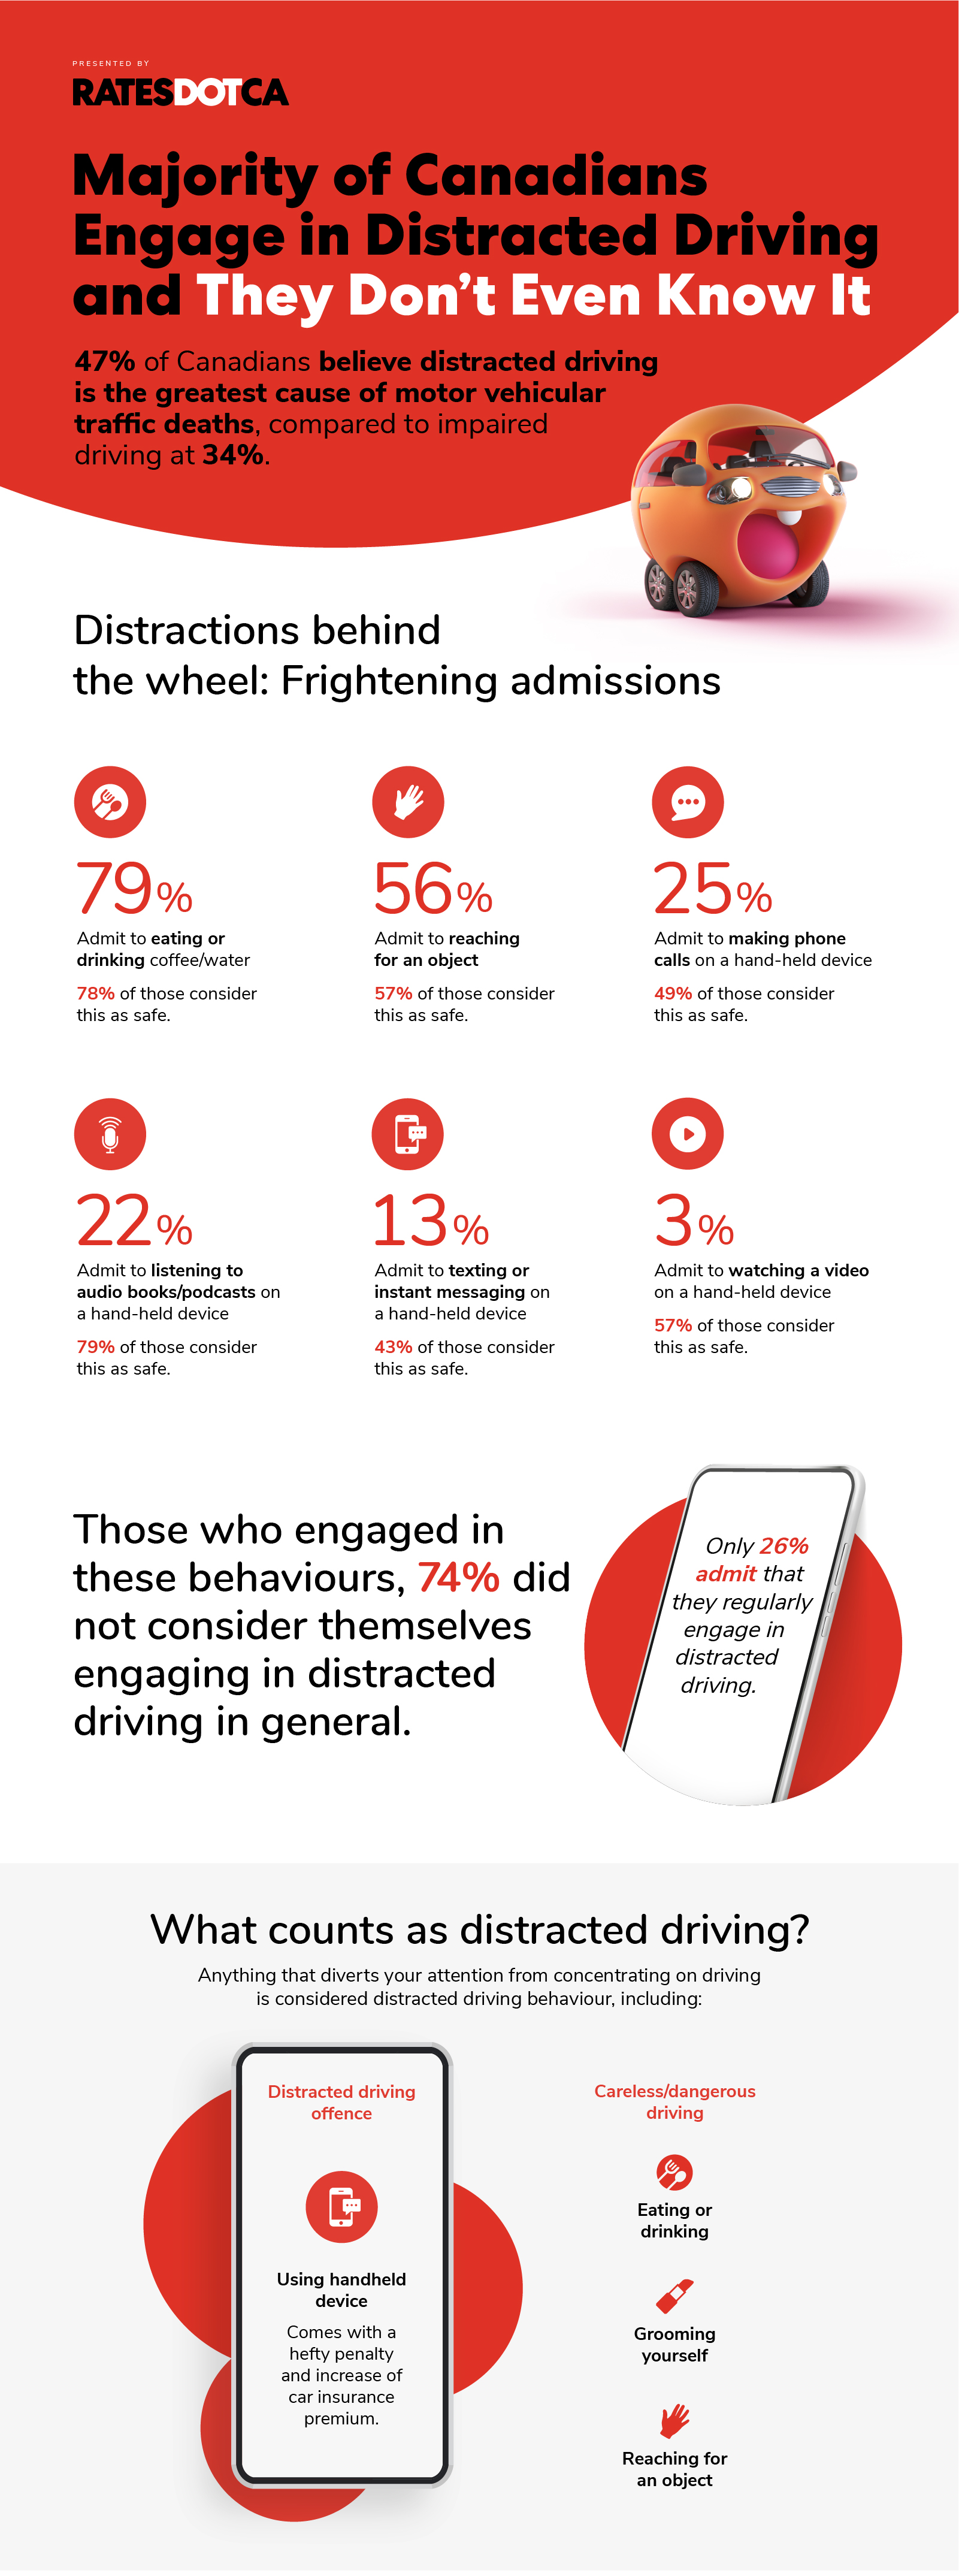 RDOT-037_2021_Distracted_Driving_Infographic_@2x-FINAL